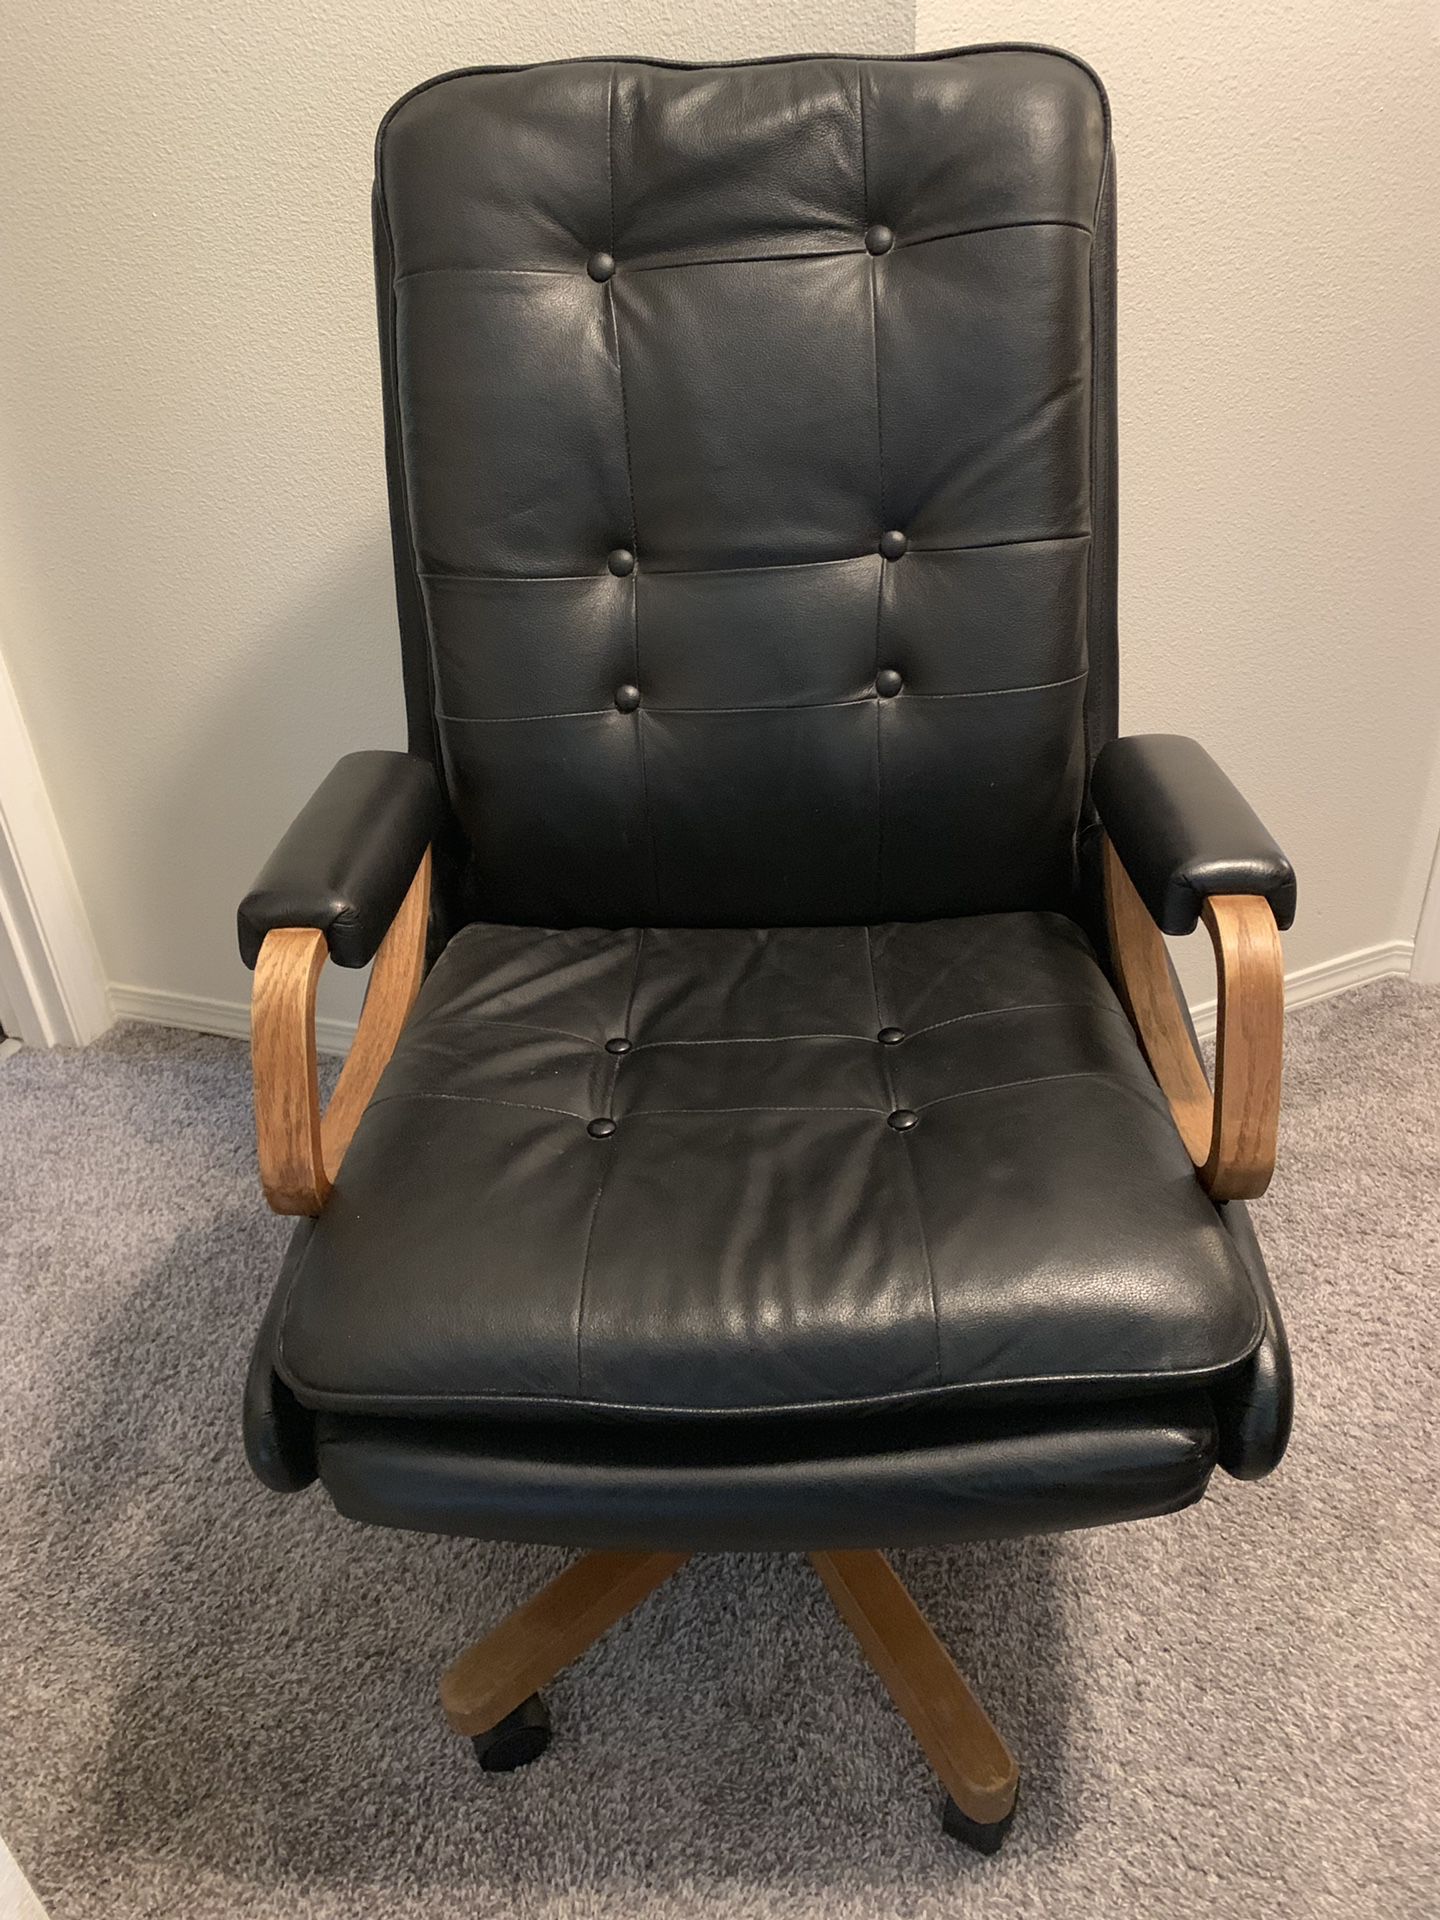 Black leather Office/computer chair